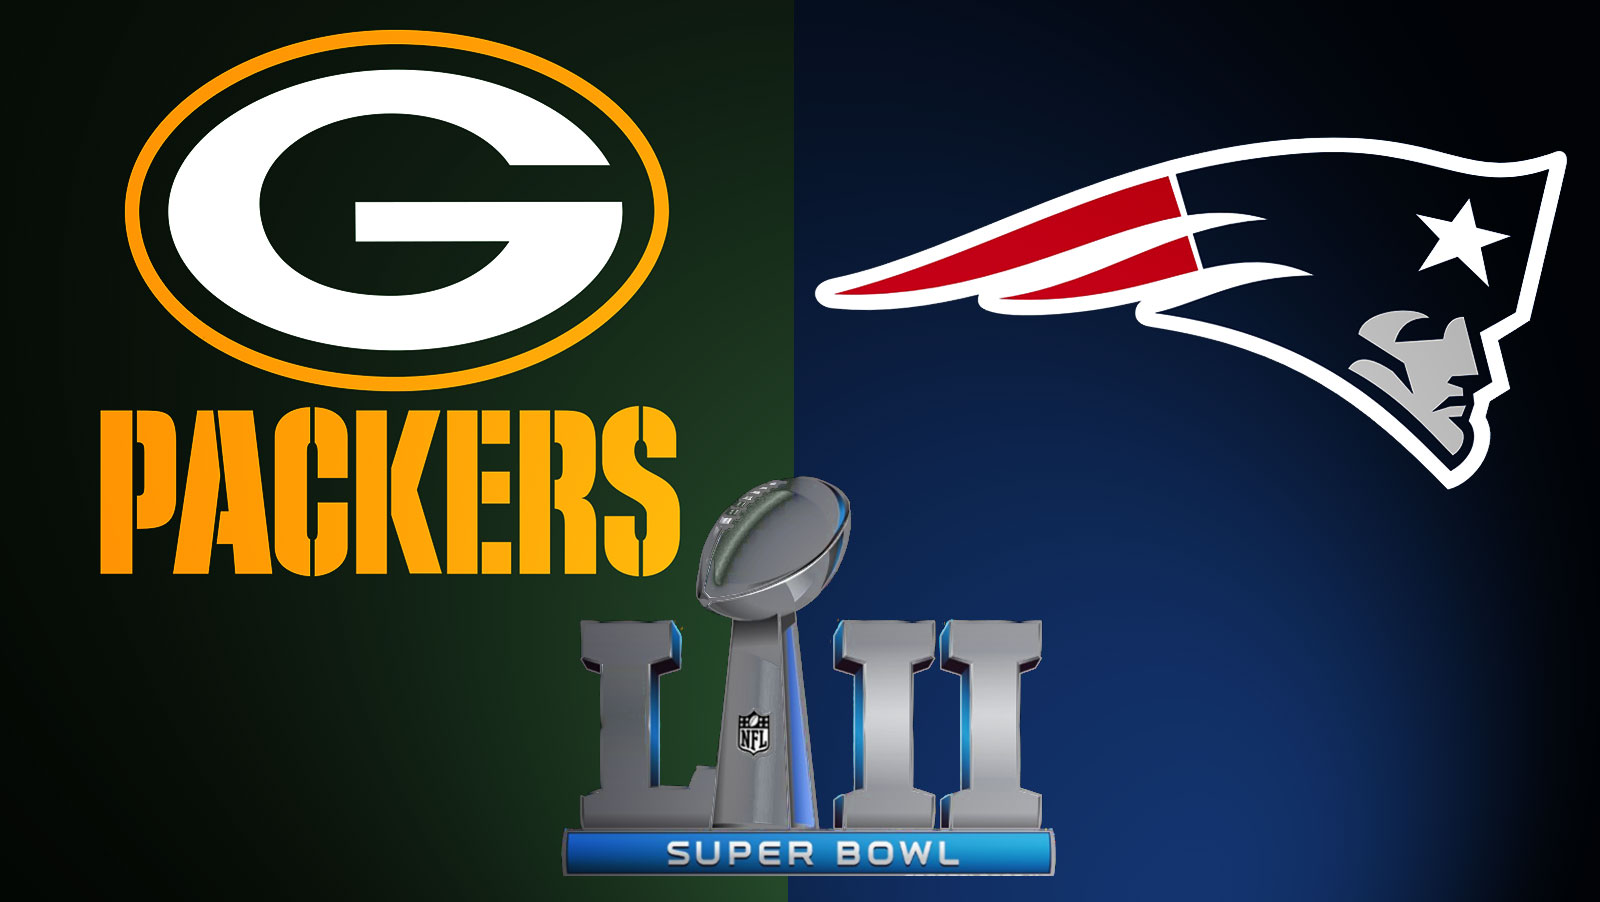 Patriots, Packers starting season as favorites to win Super Bowl 52